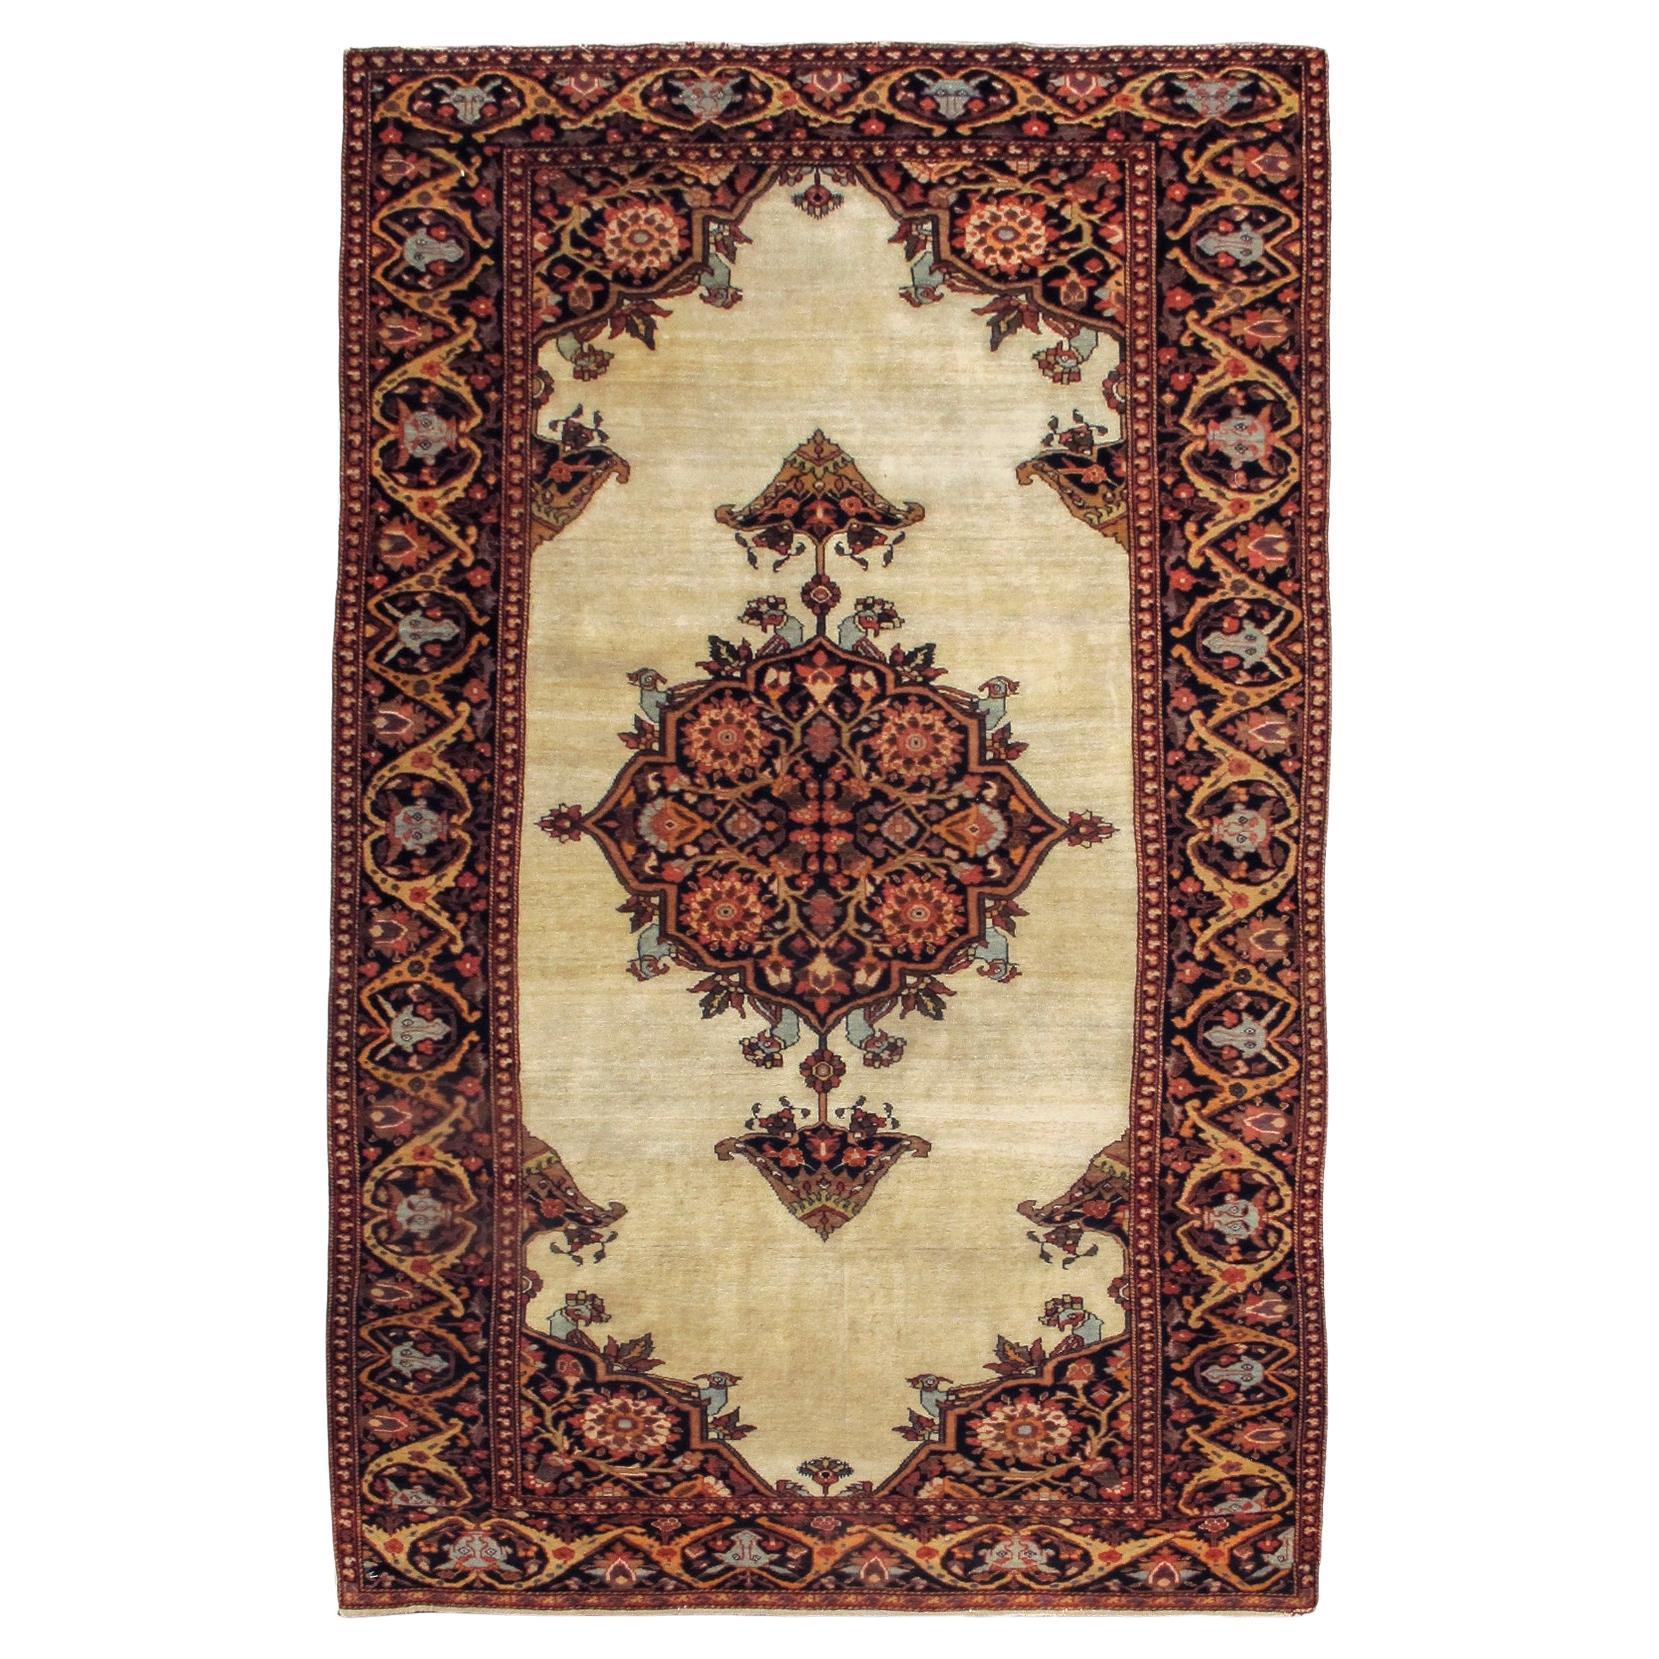 Antique Persian Fereghan Sarouk Rug, 19th Century For Sale